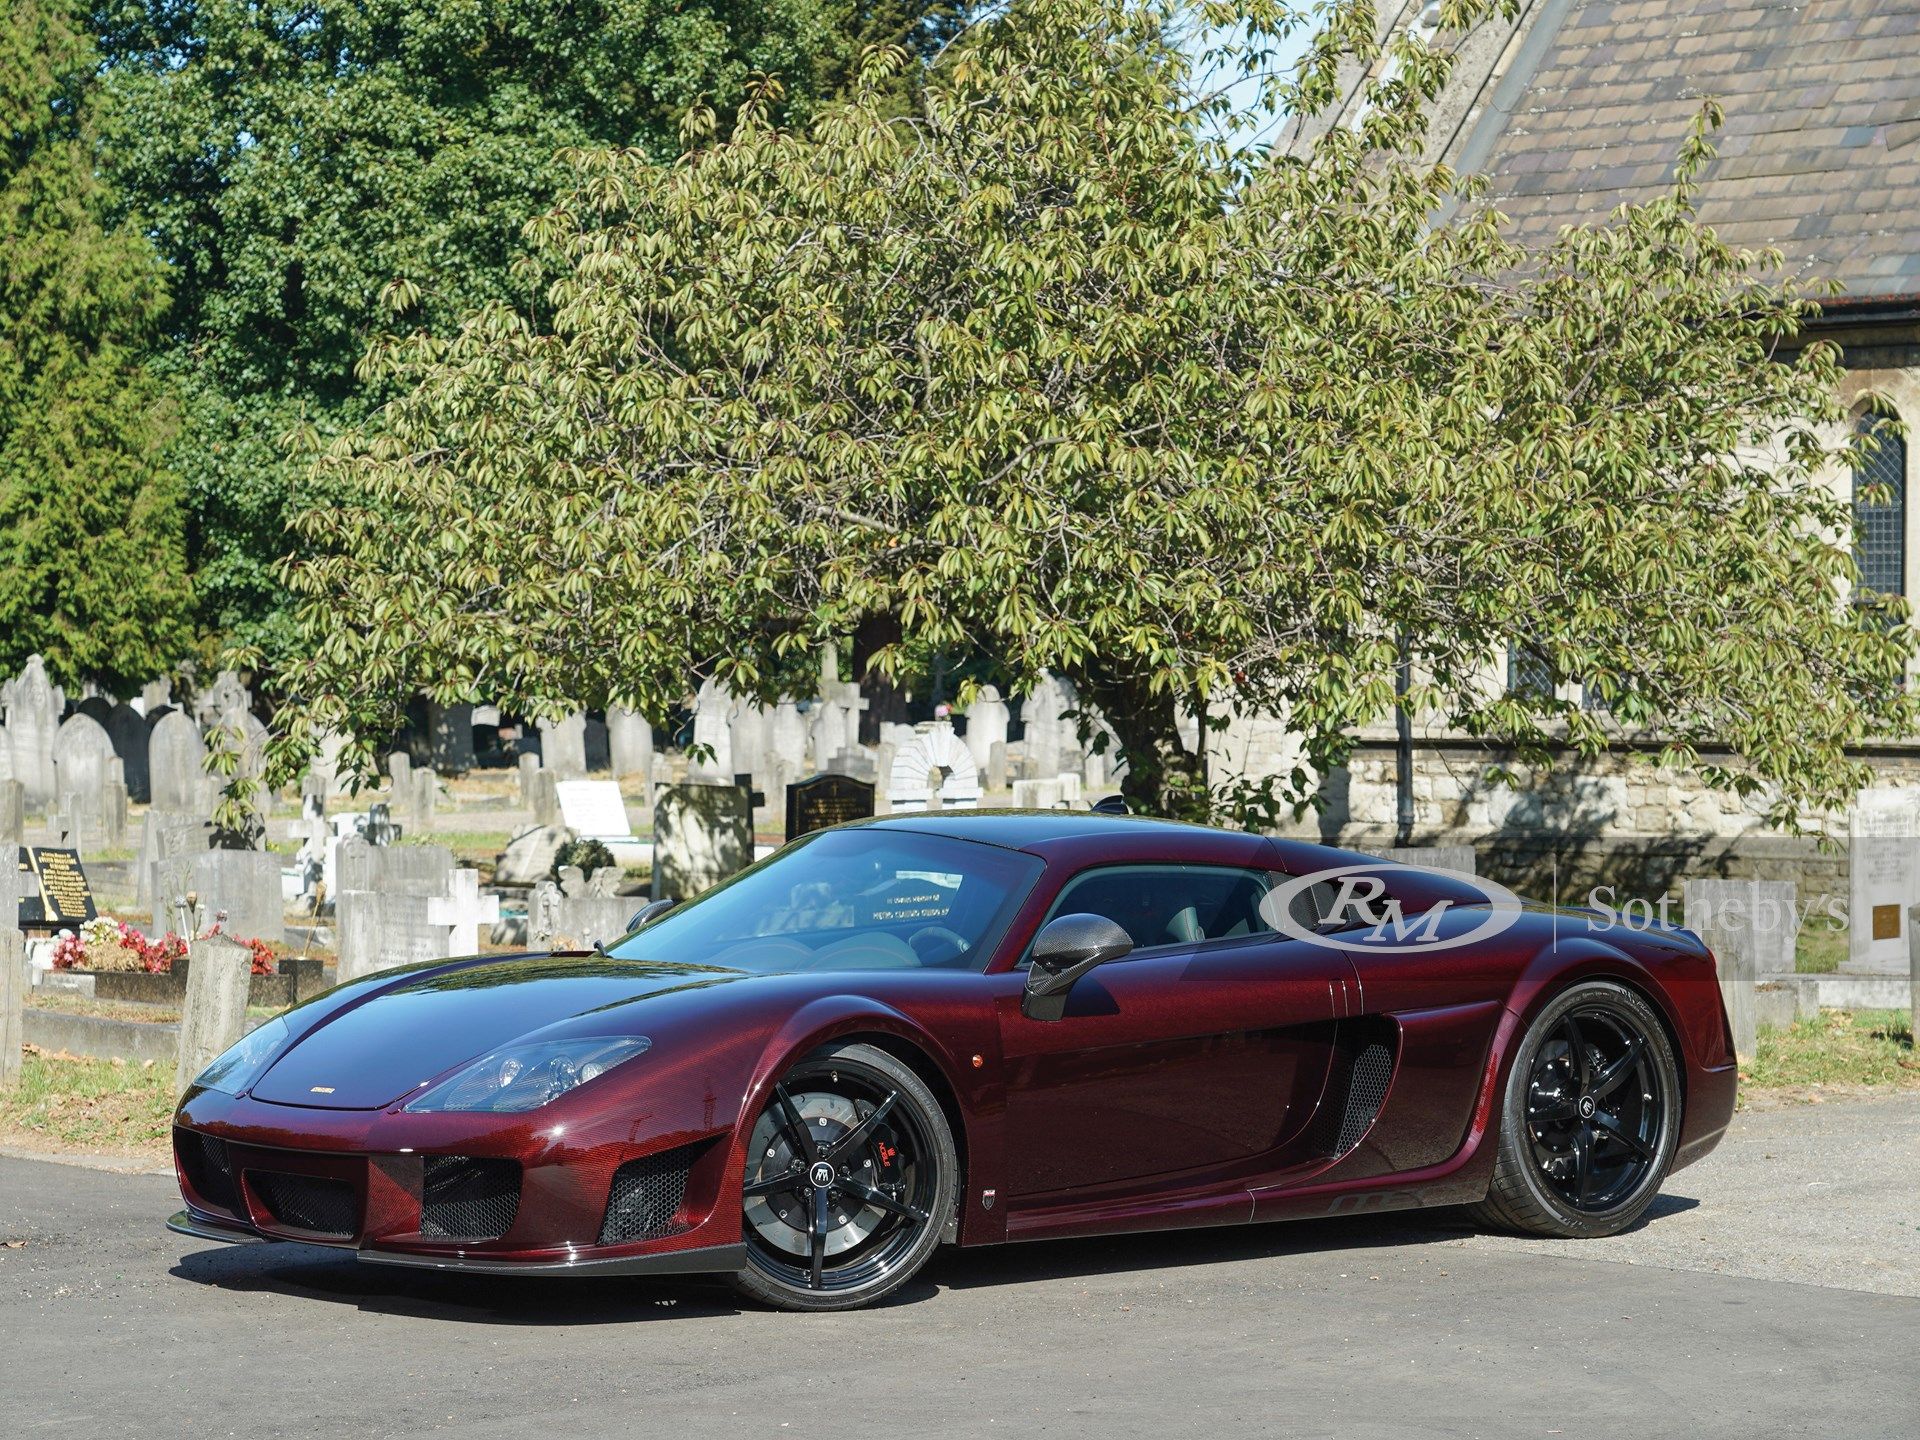 Noble M600 CarbonSport. London 2019. RM Sotheby's